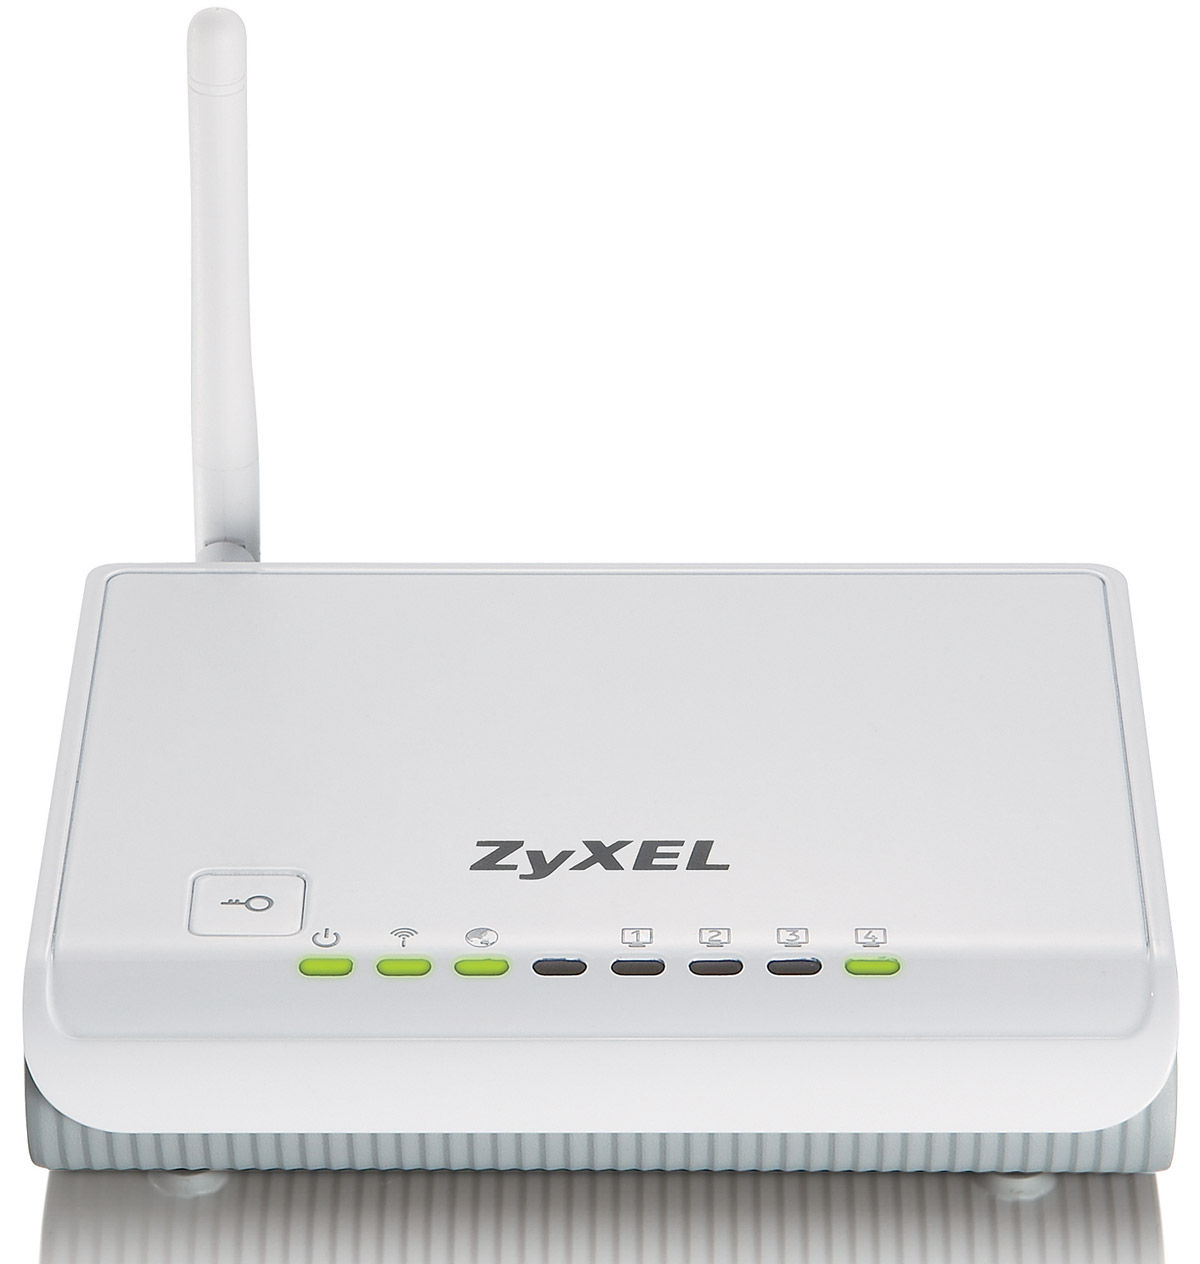 ZyXEL NBG-417N Default Password & Login, Manuals and Reset Instructions ...